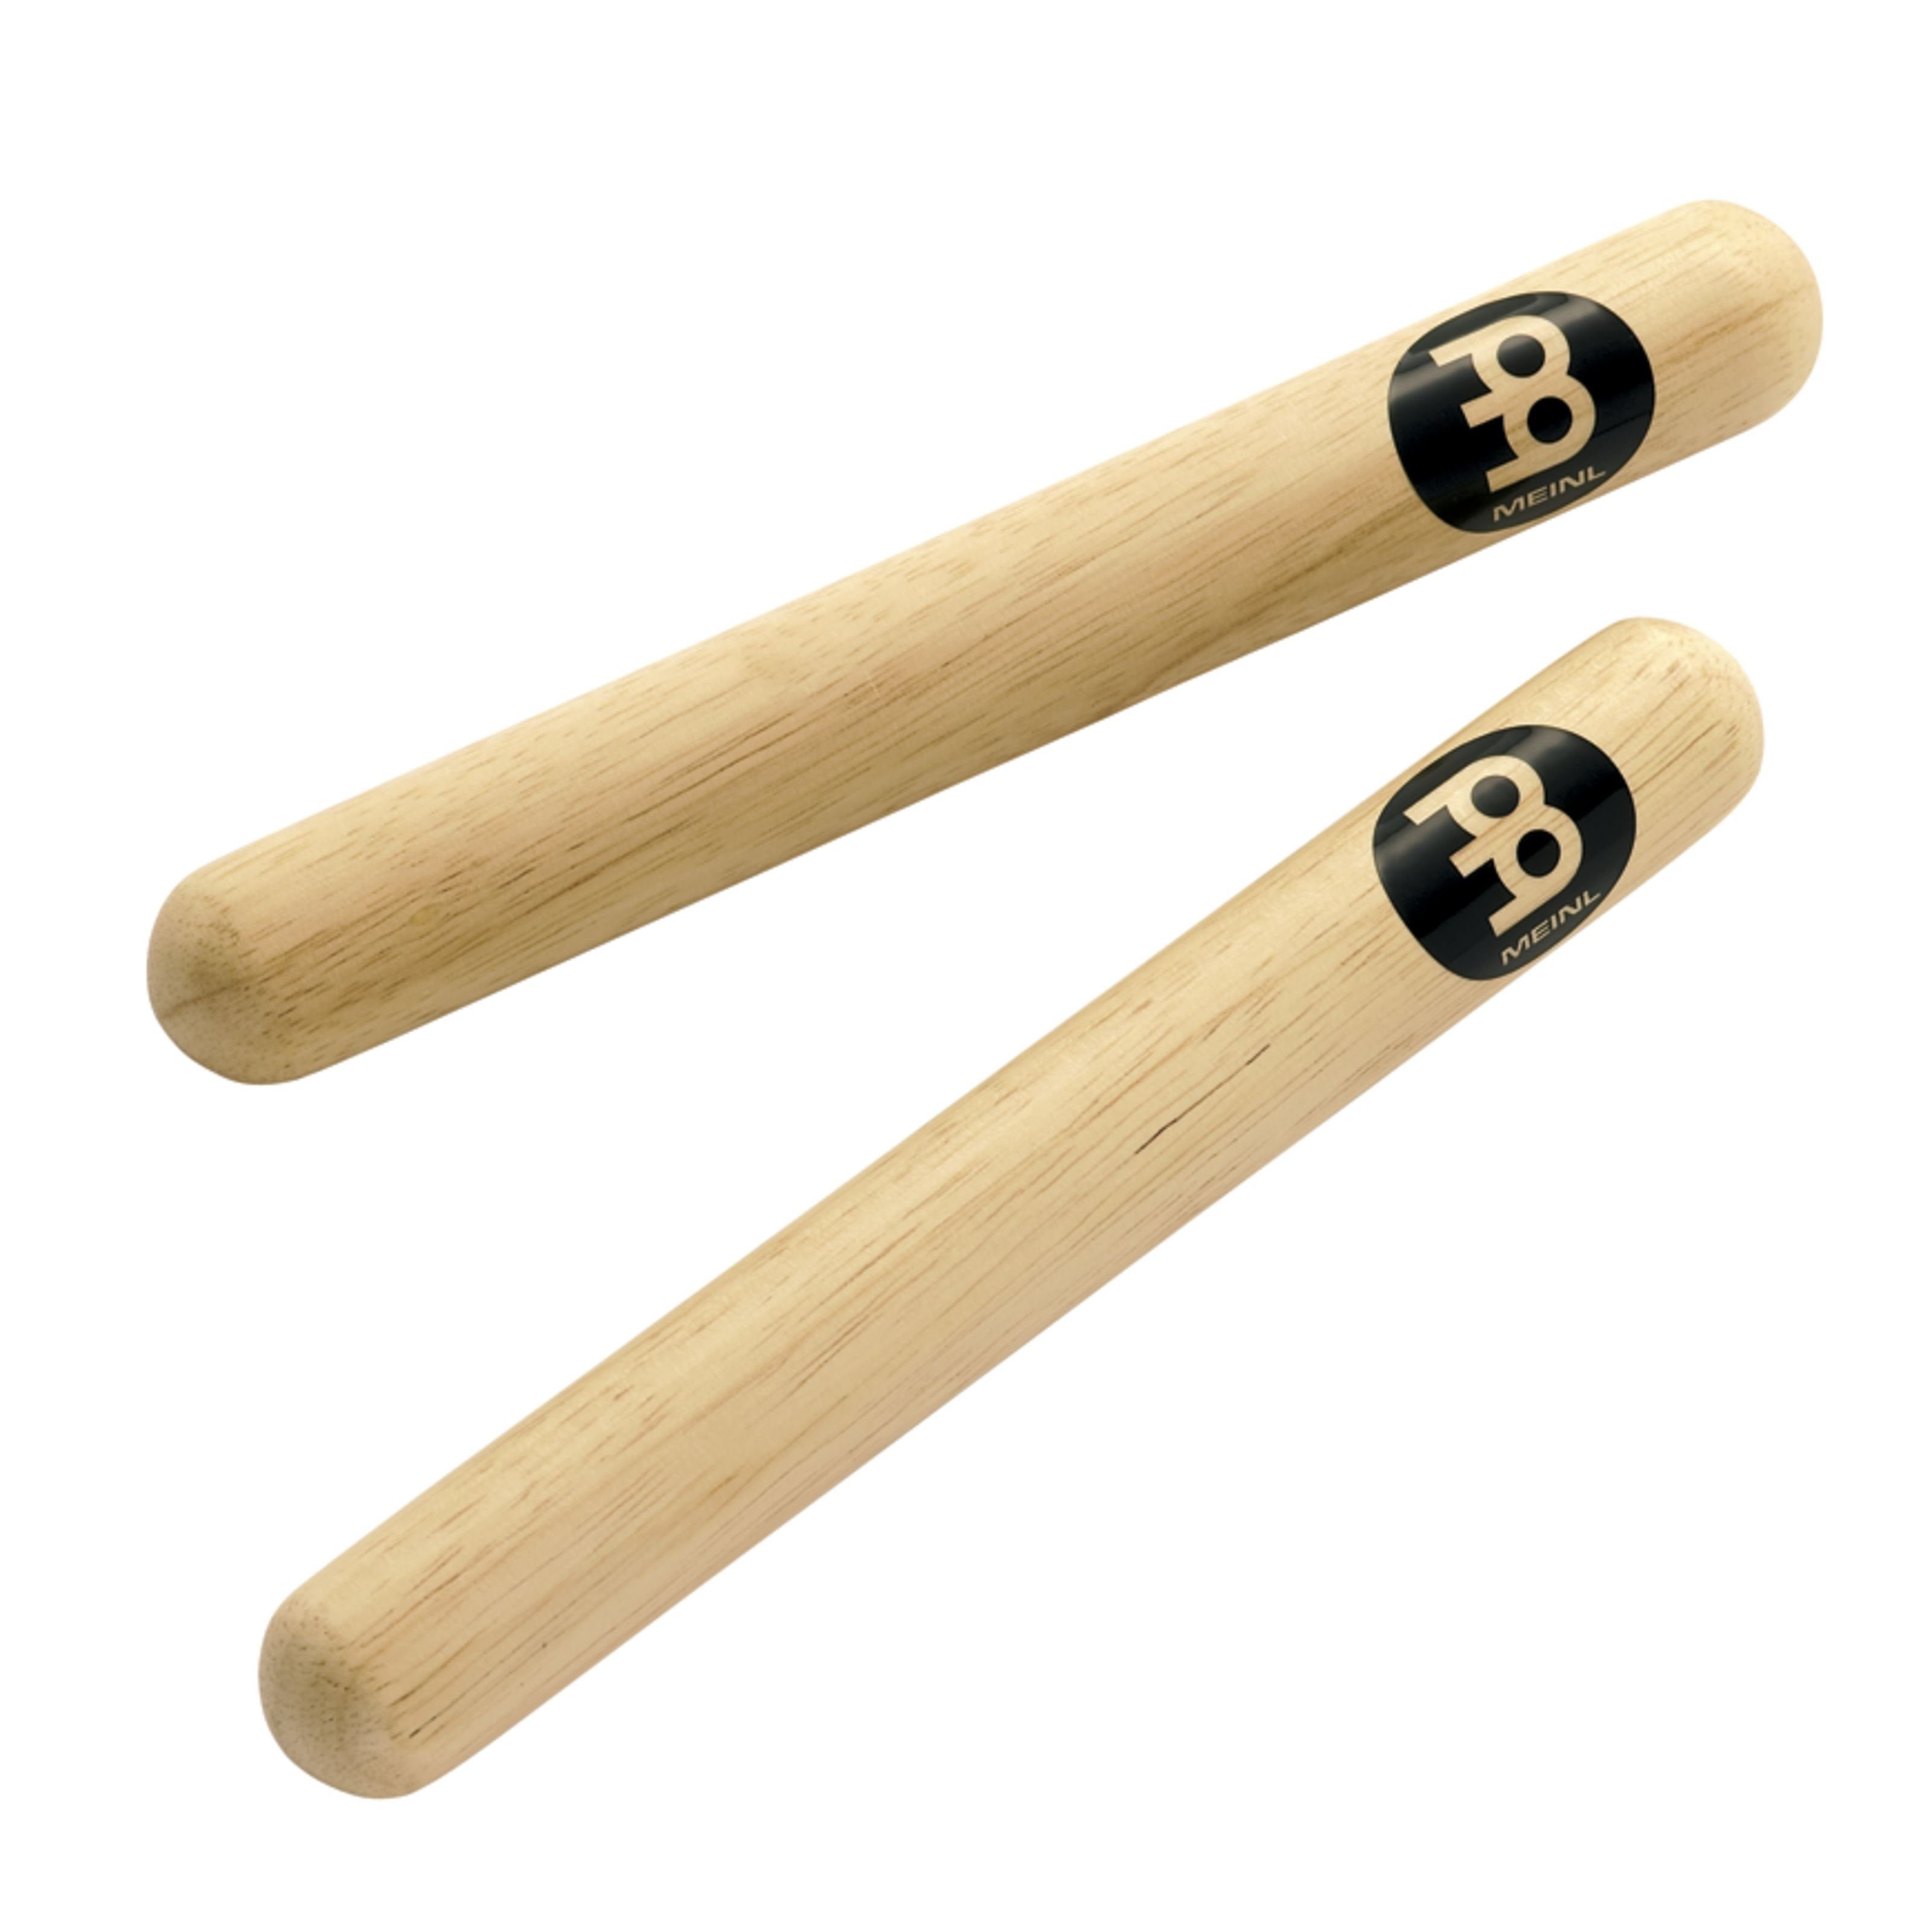 Meinl Claves CL1HW Hardwood Claves Spielzeug-Musikinstrument, Percussion -